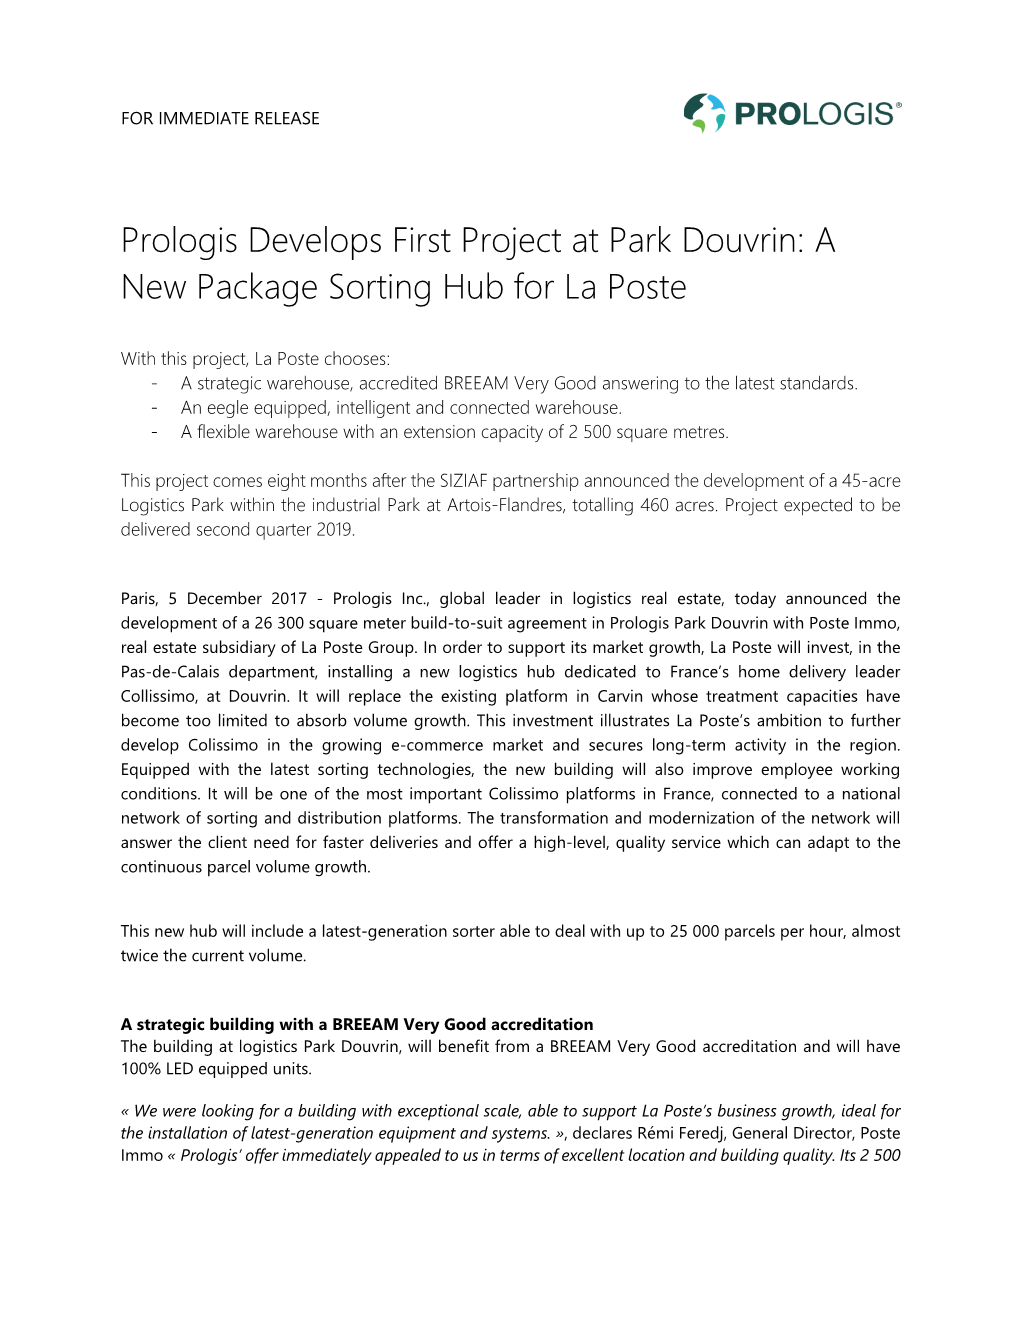 Prologis Develops First Project at Park Douvrin: a New Package Sorting Hub for La Poste